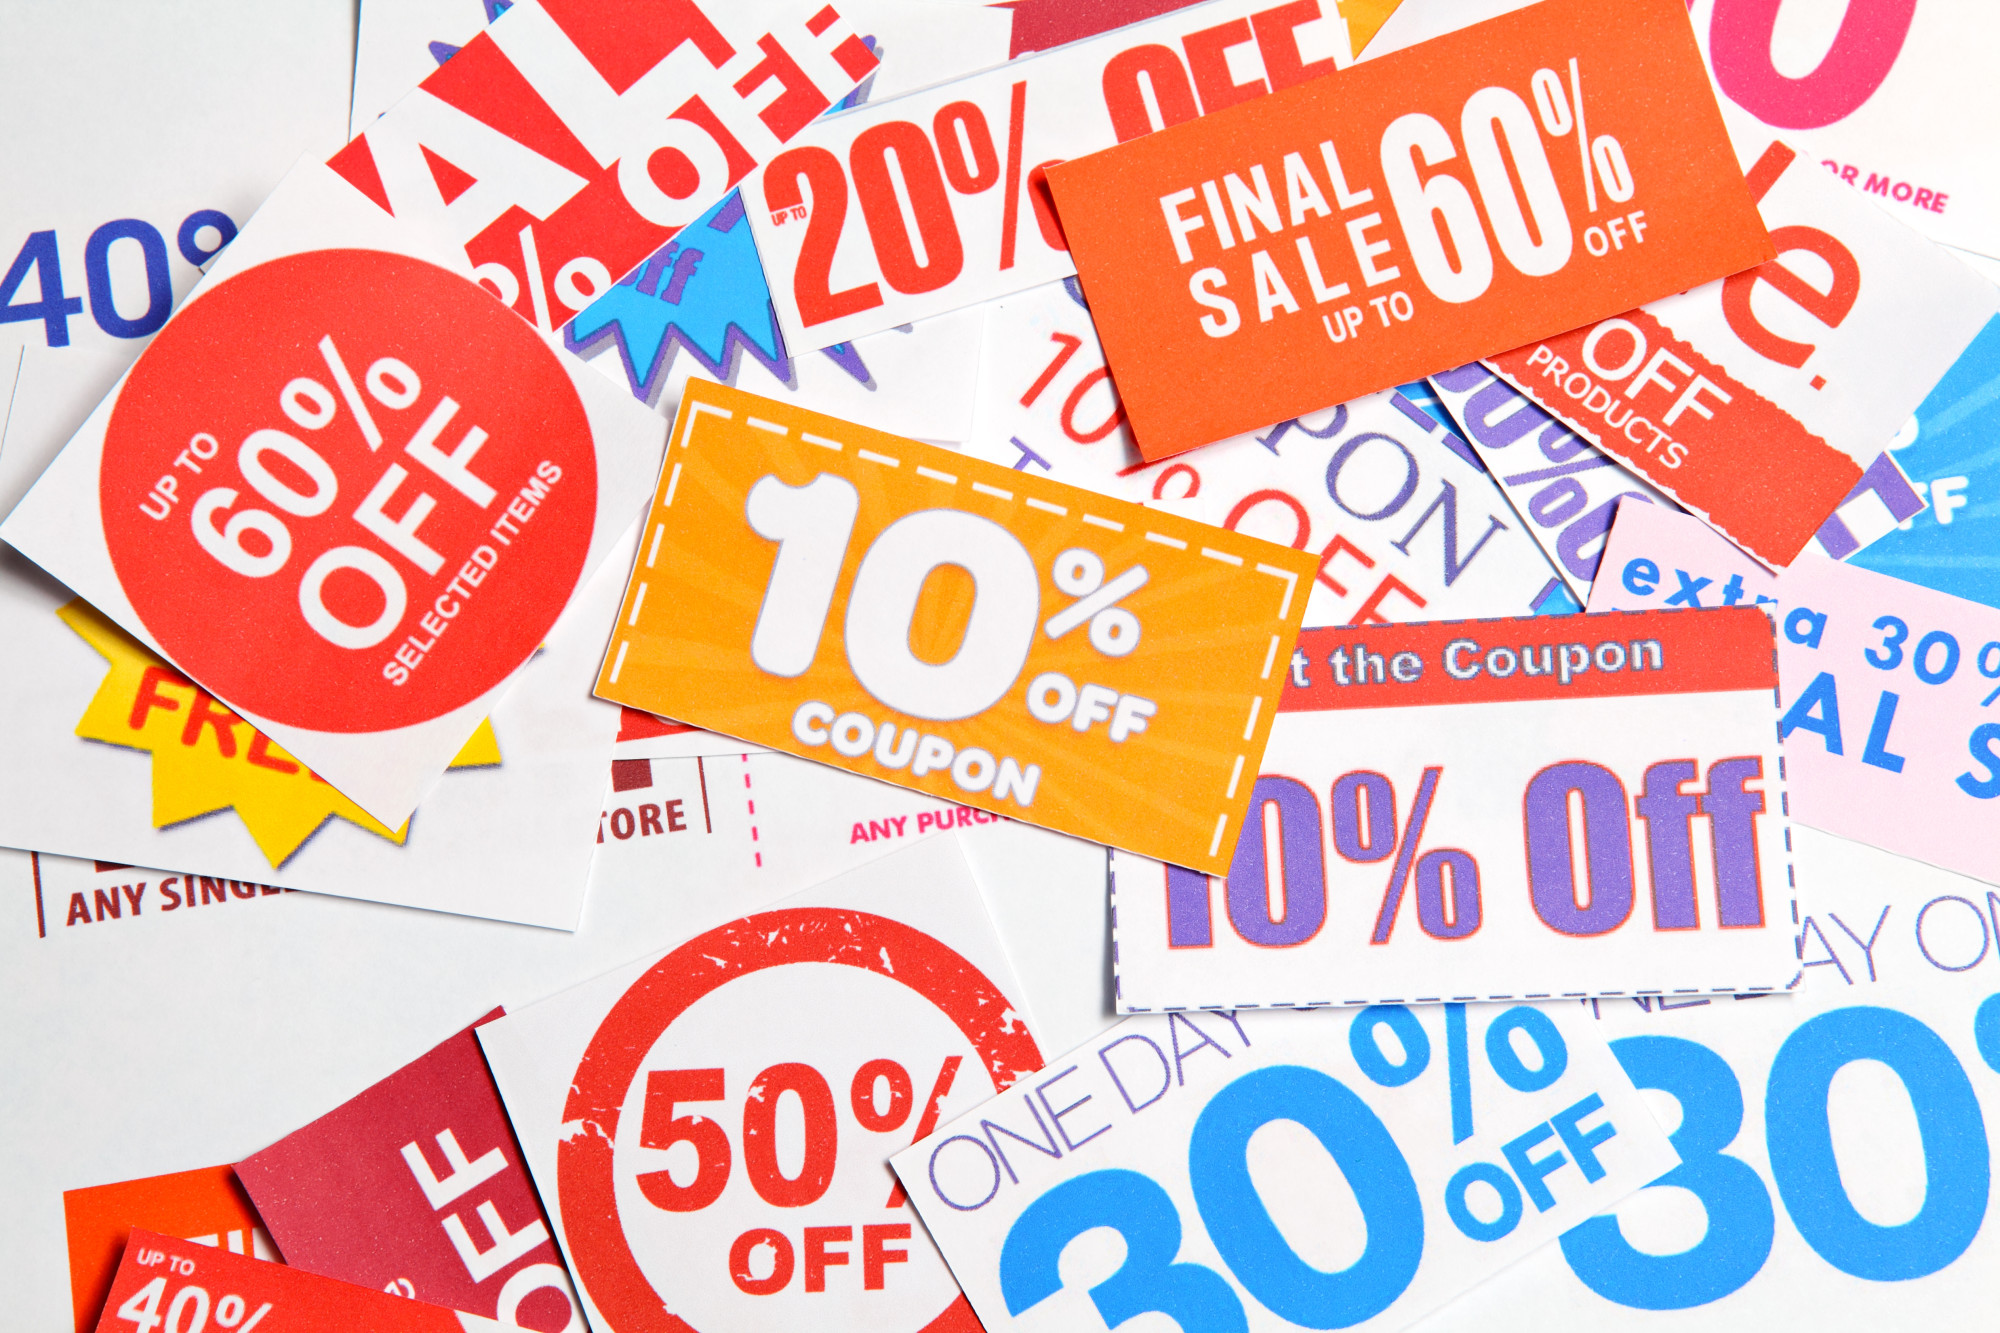 how-to-find-deals-online-with-huge-discounts-and-sweet-coupons